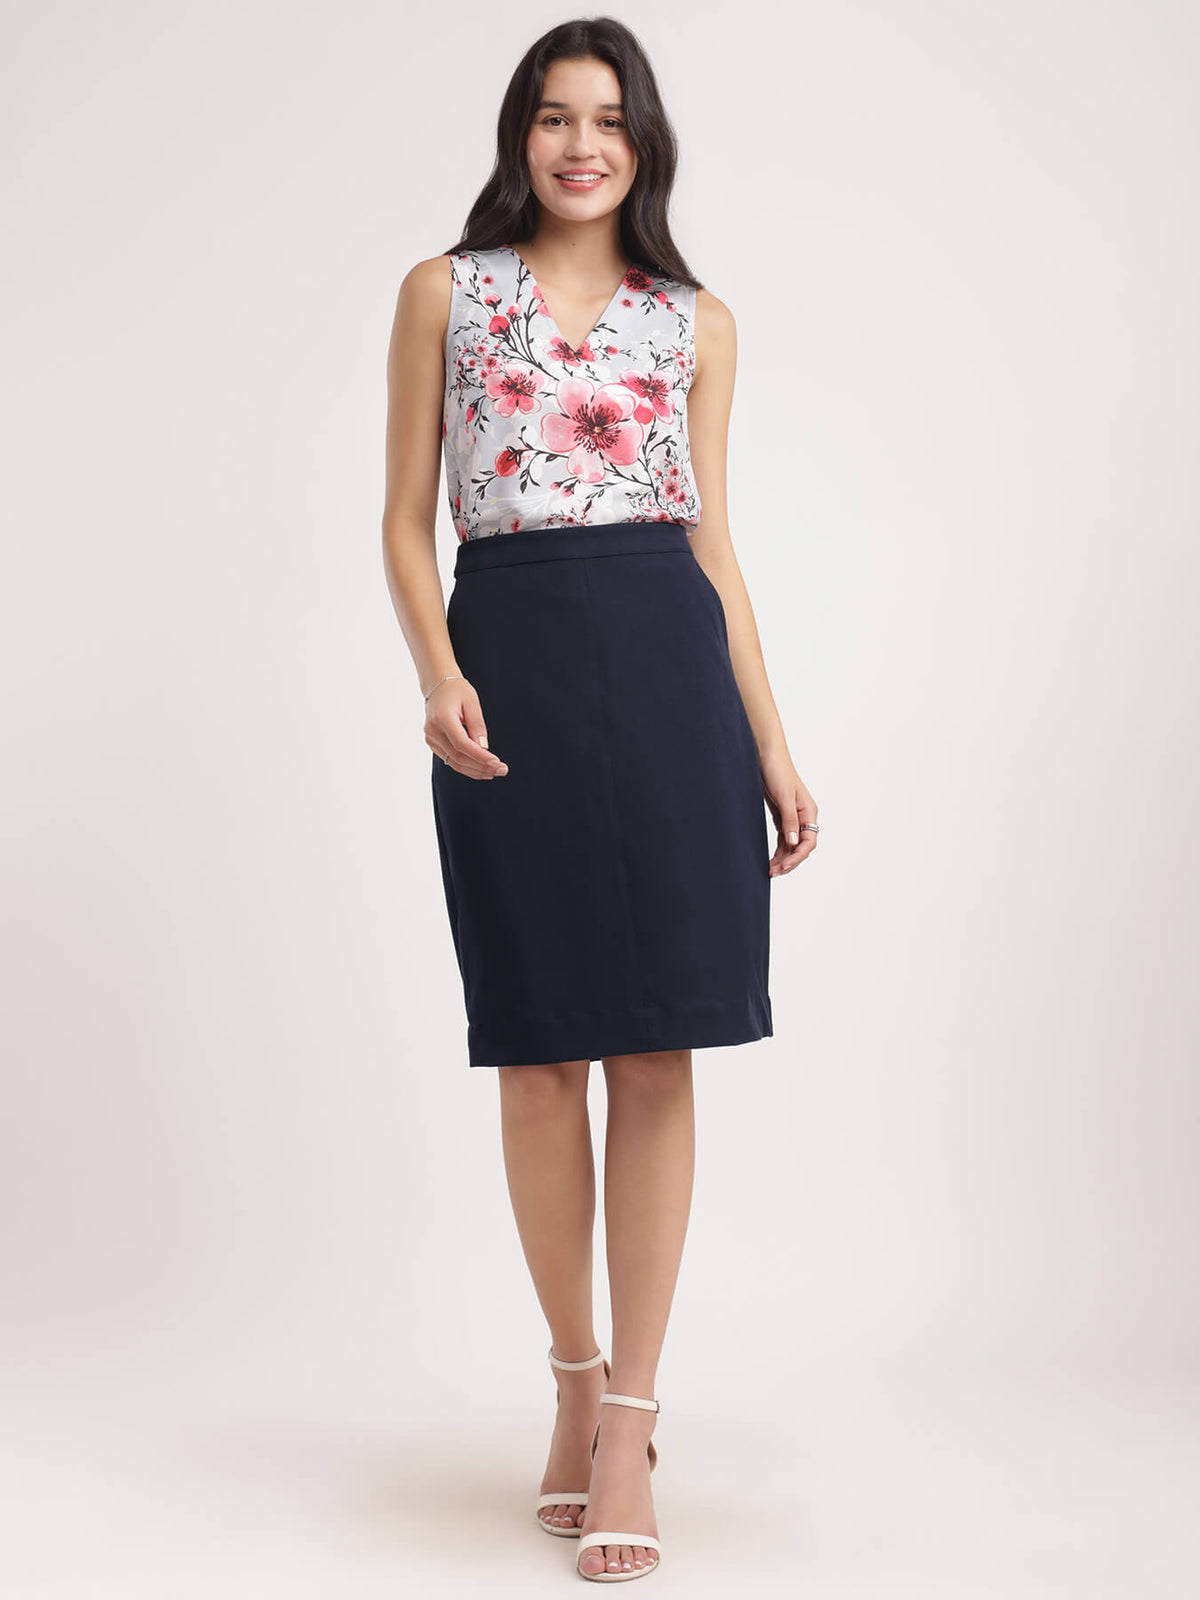 Stretchable A-line Skirt - Navy